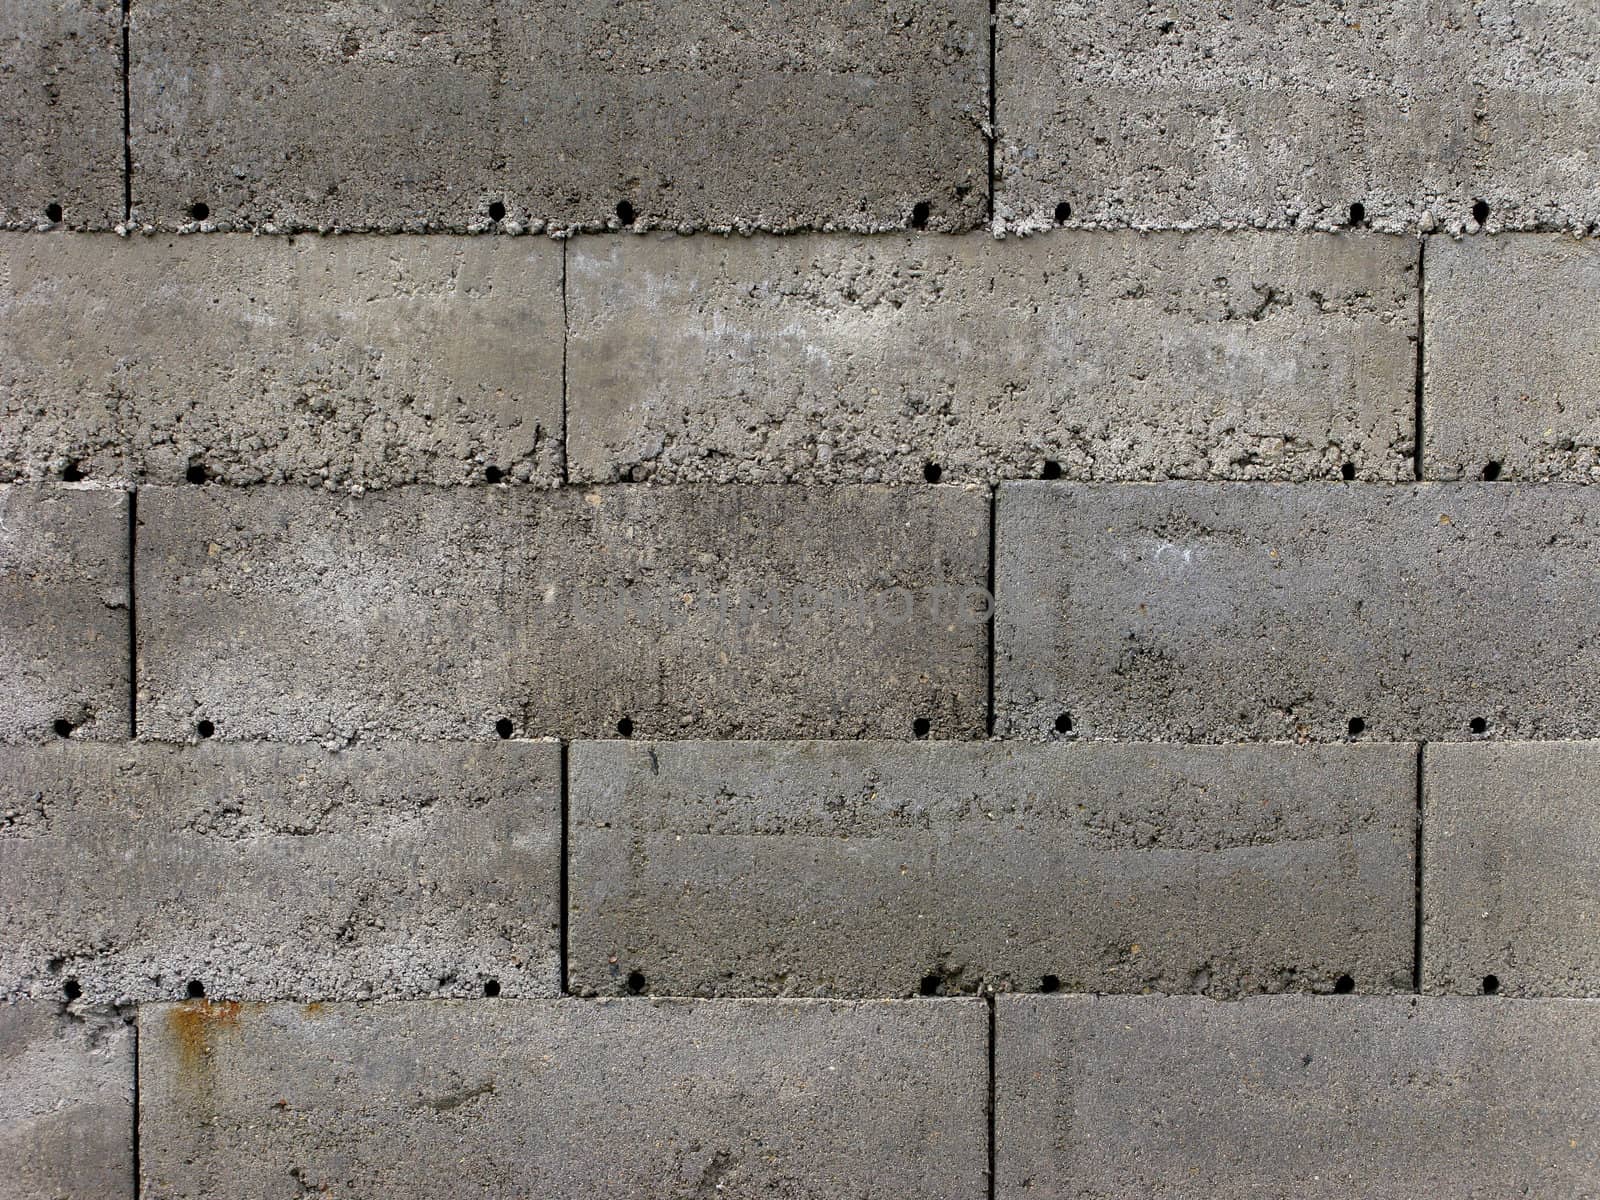 Wall of concrete blocks by wander